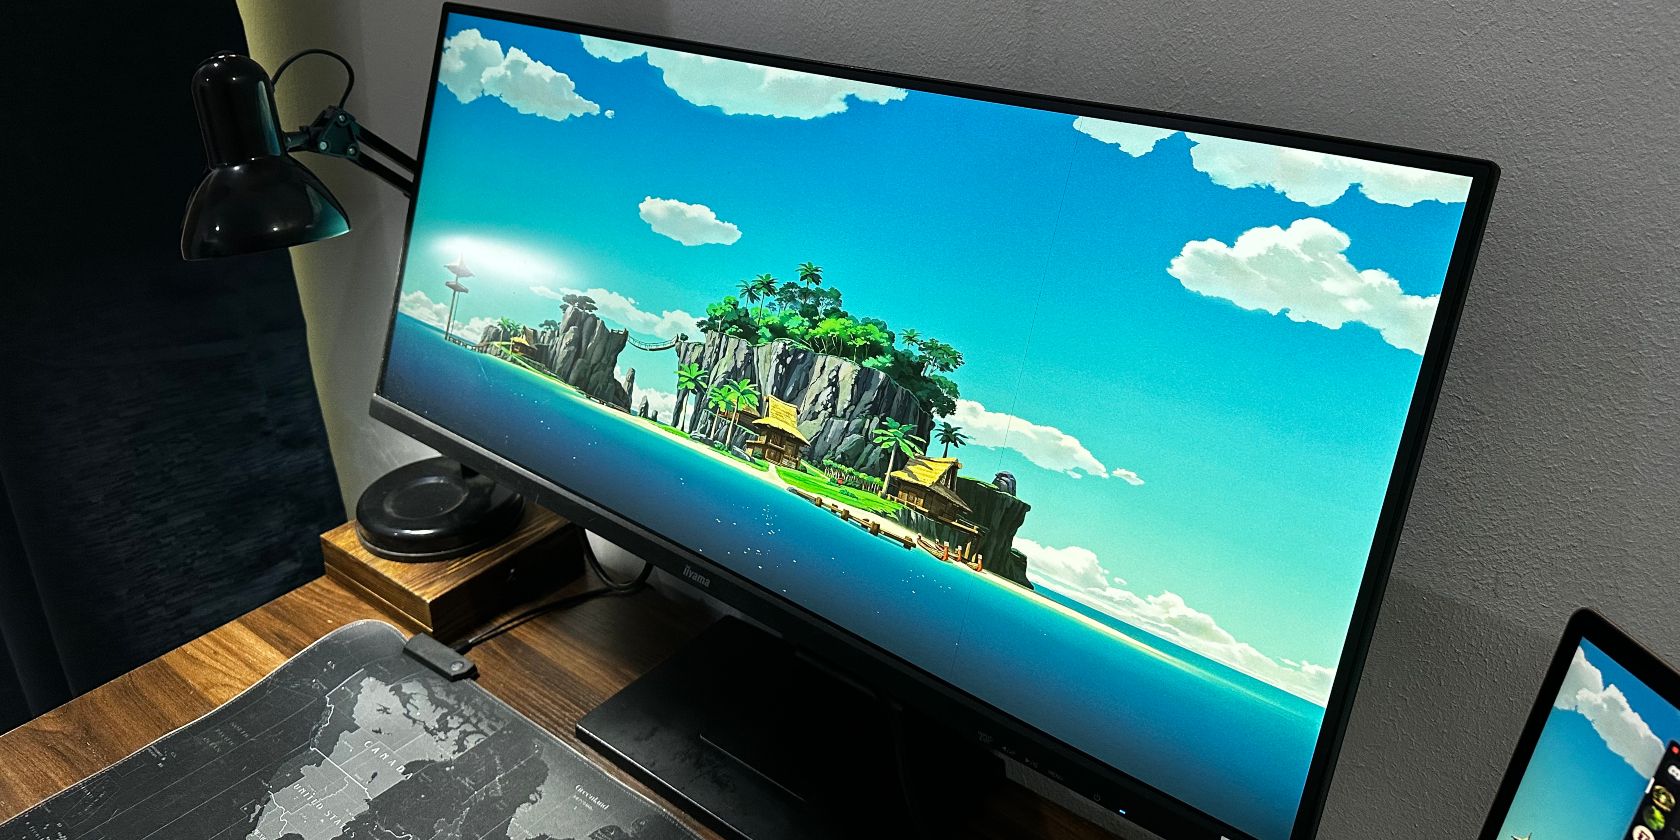 Ultrawide 4K monitor on a desk with a lamp